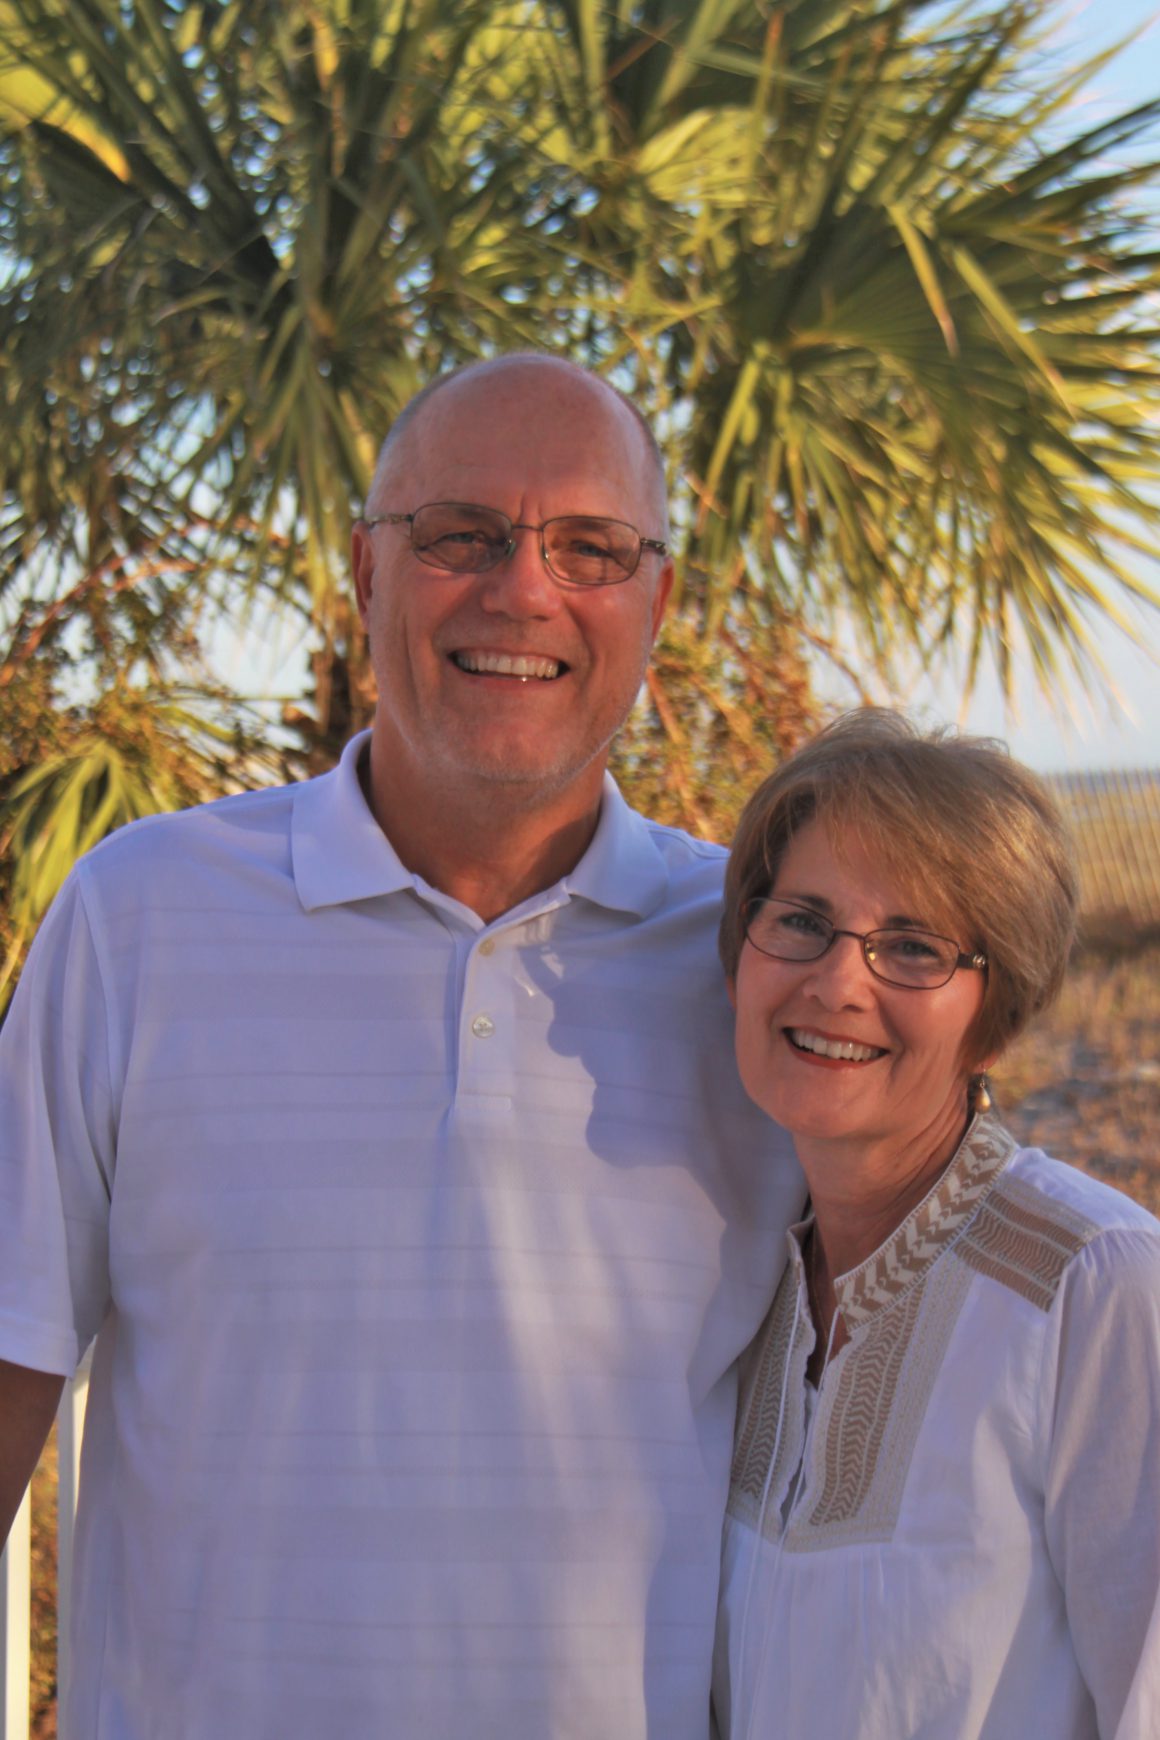 Bill and Jann Newton are key Bonvera leaders who are bringing the Bonvera mission and vision alive.